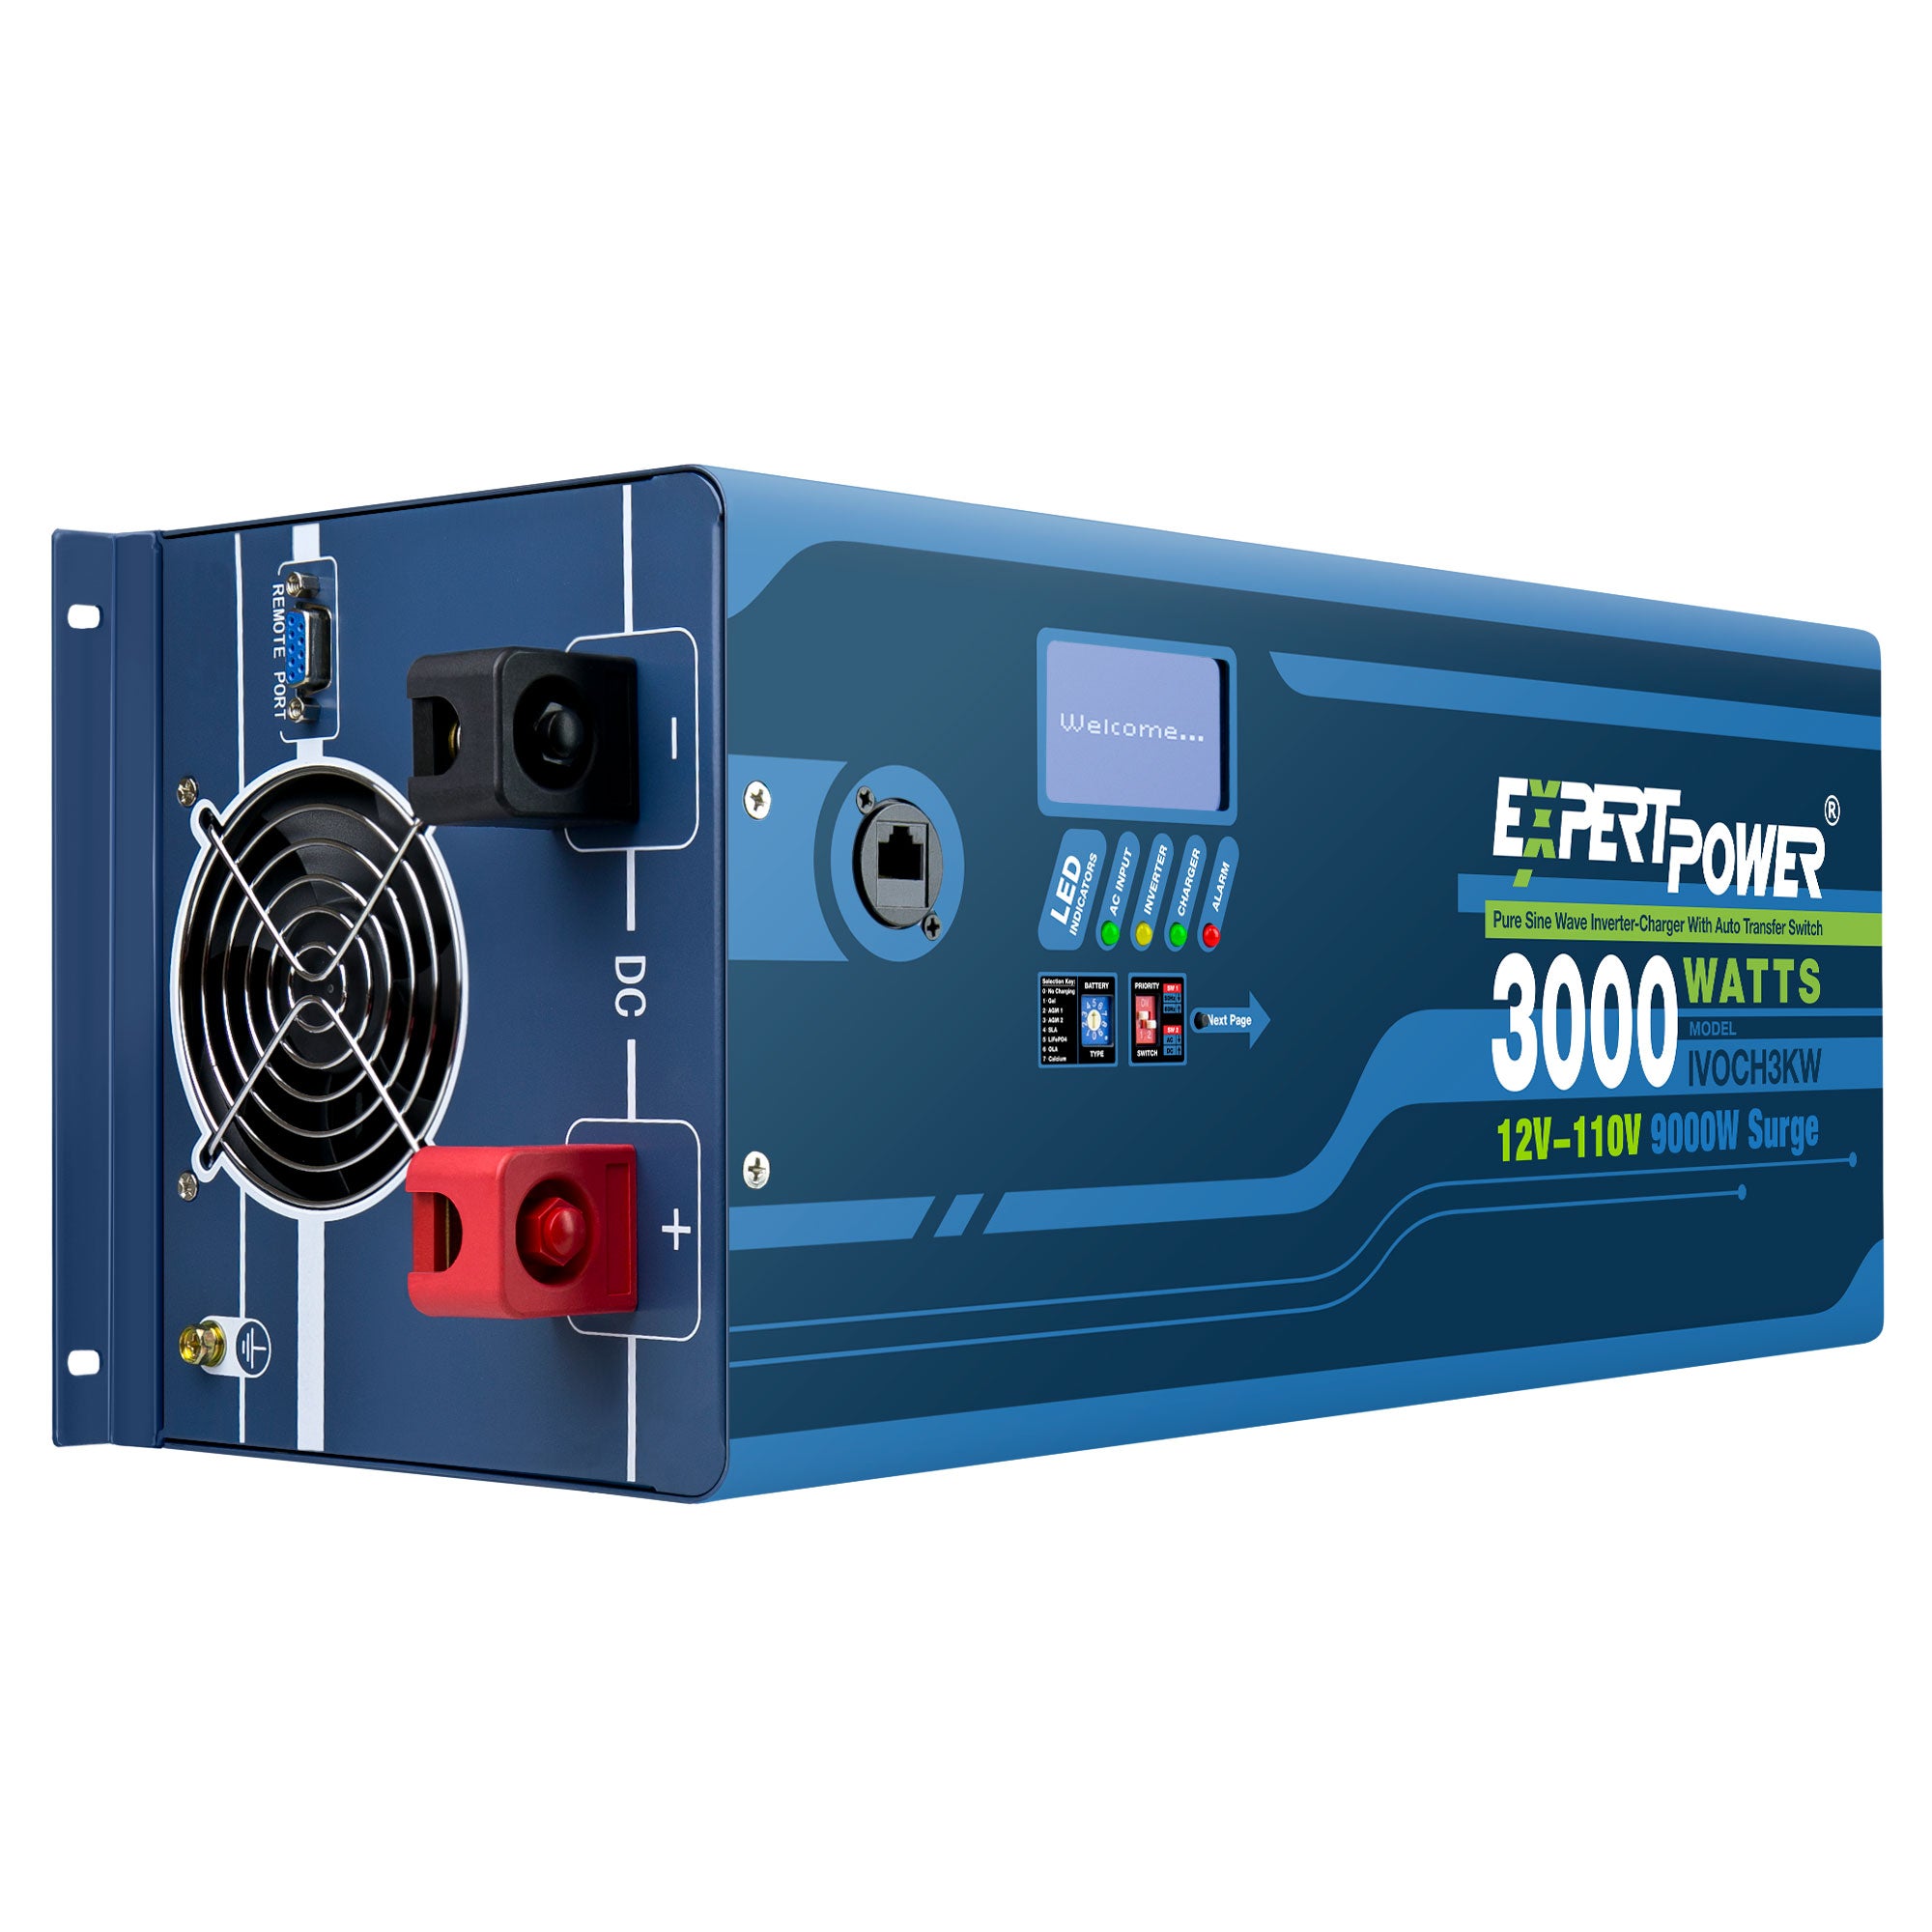 All-in-one Inverter Built in 3000W 24V Pure Sine Wave Power